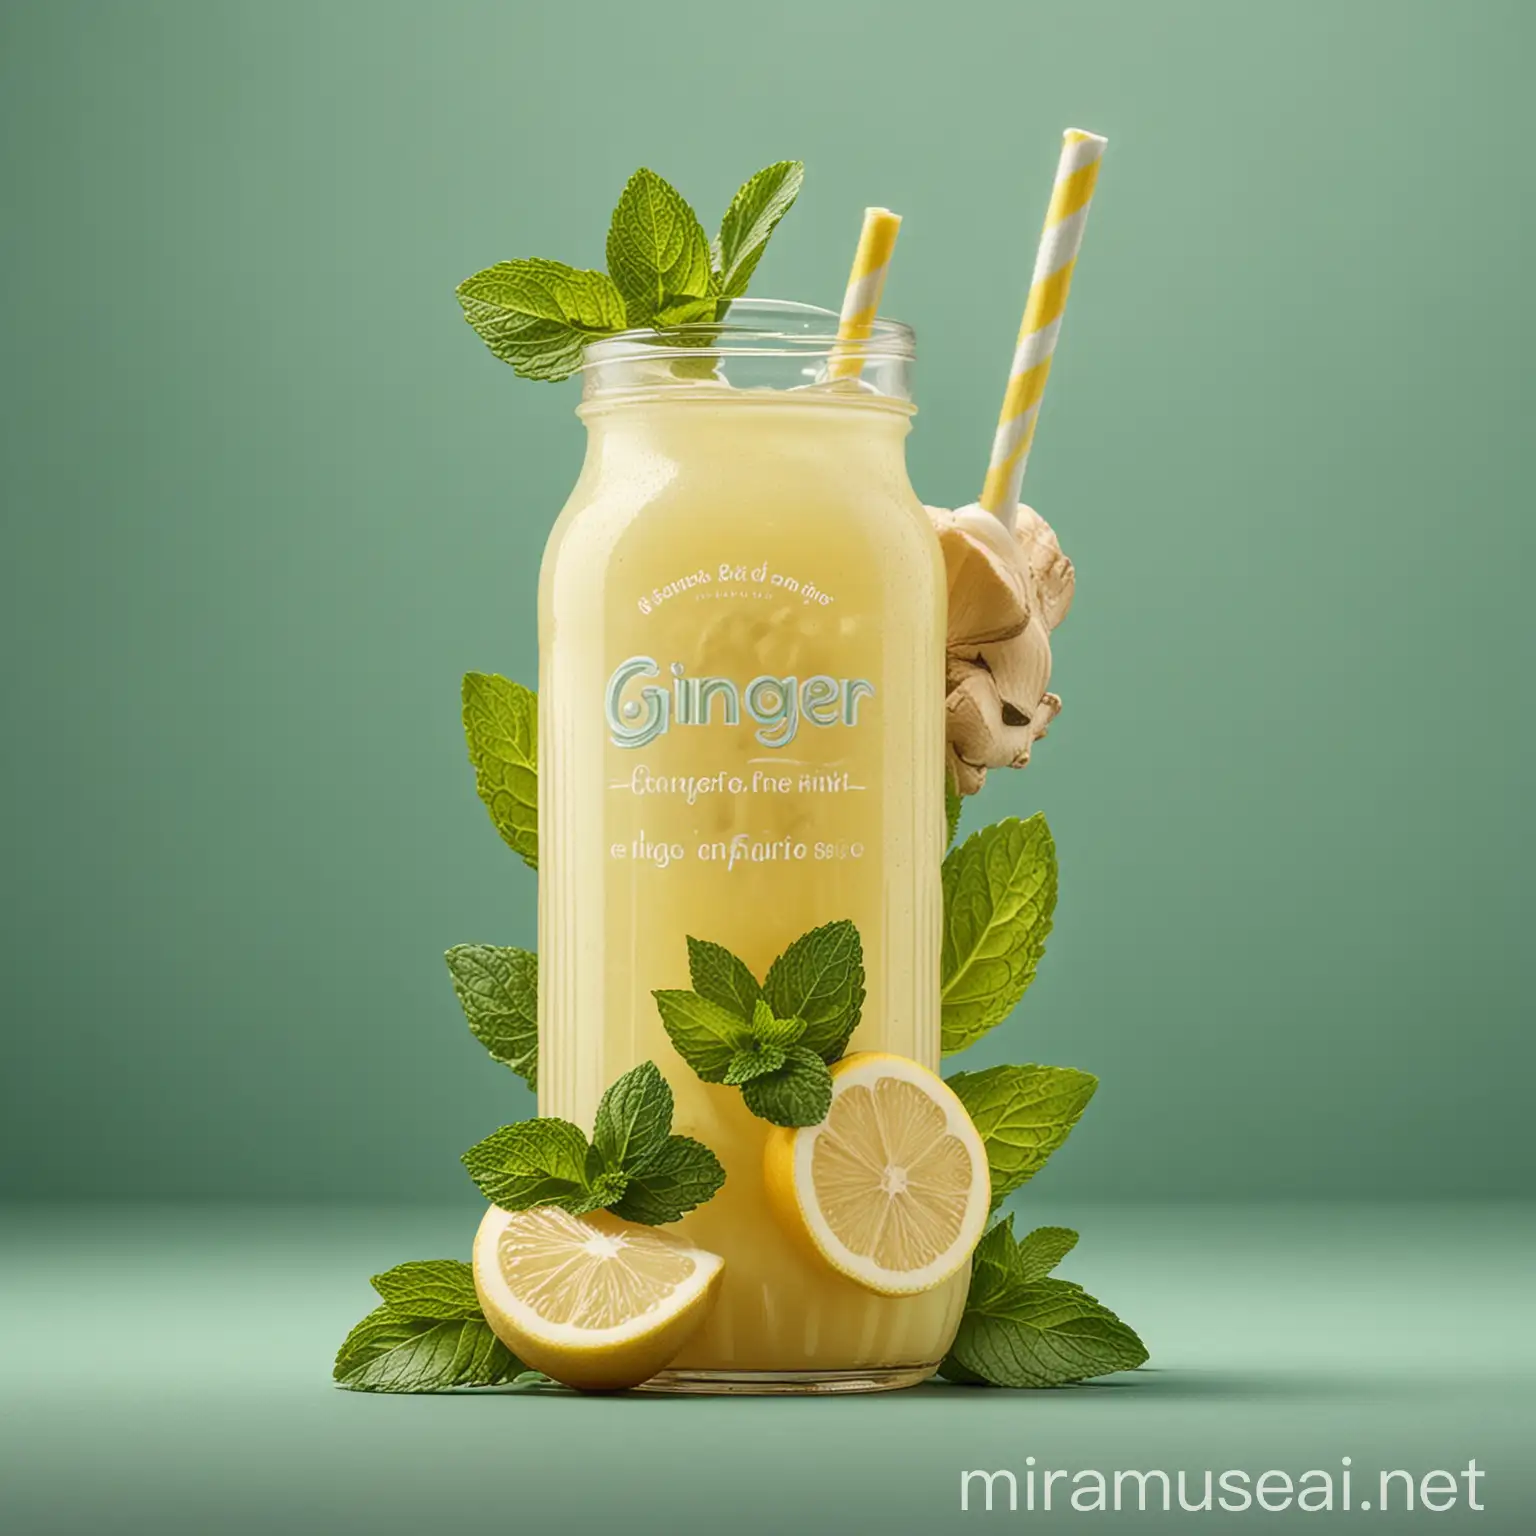 ginger and mint lemonade juice advertising post with headline and bodycopy with refreshing background